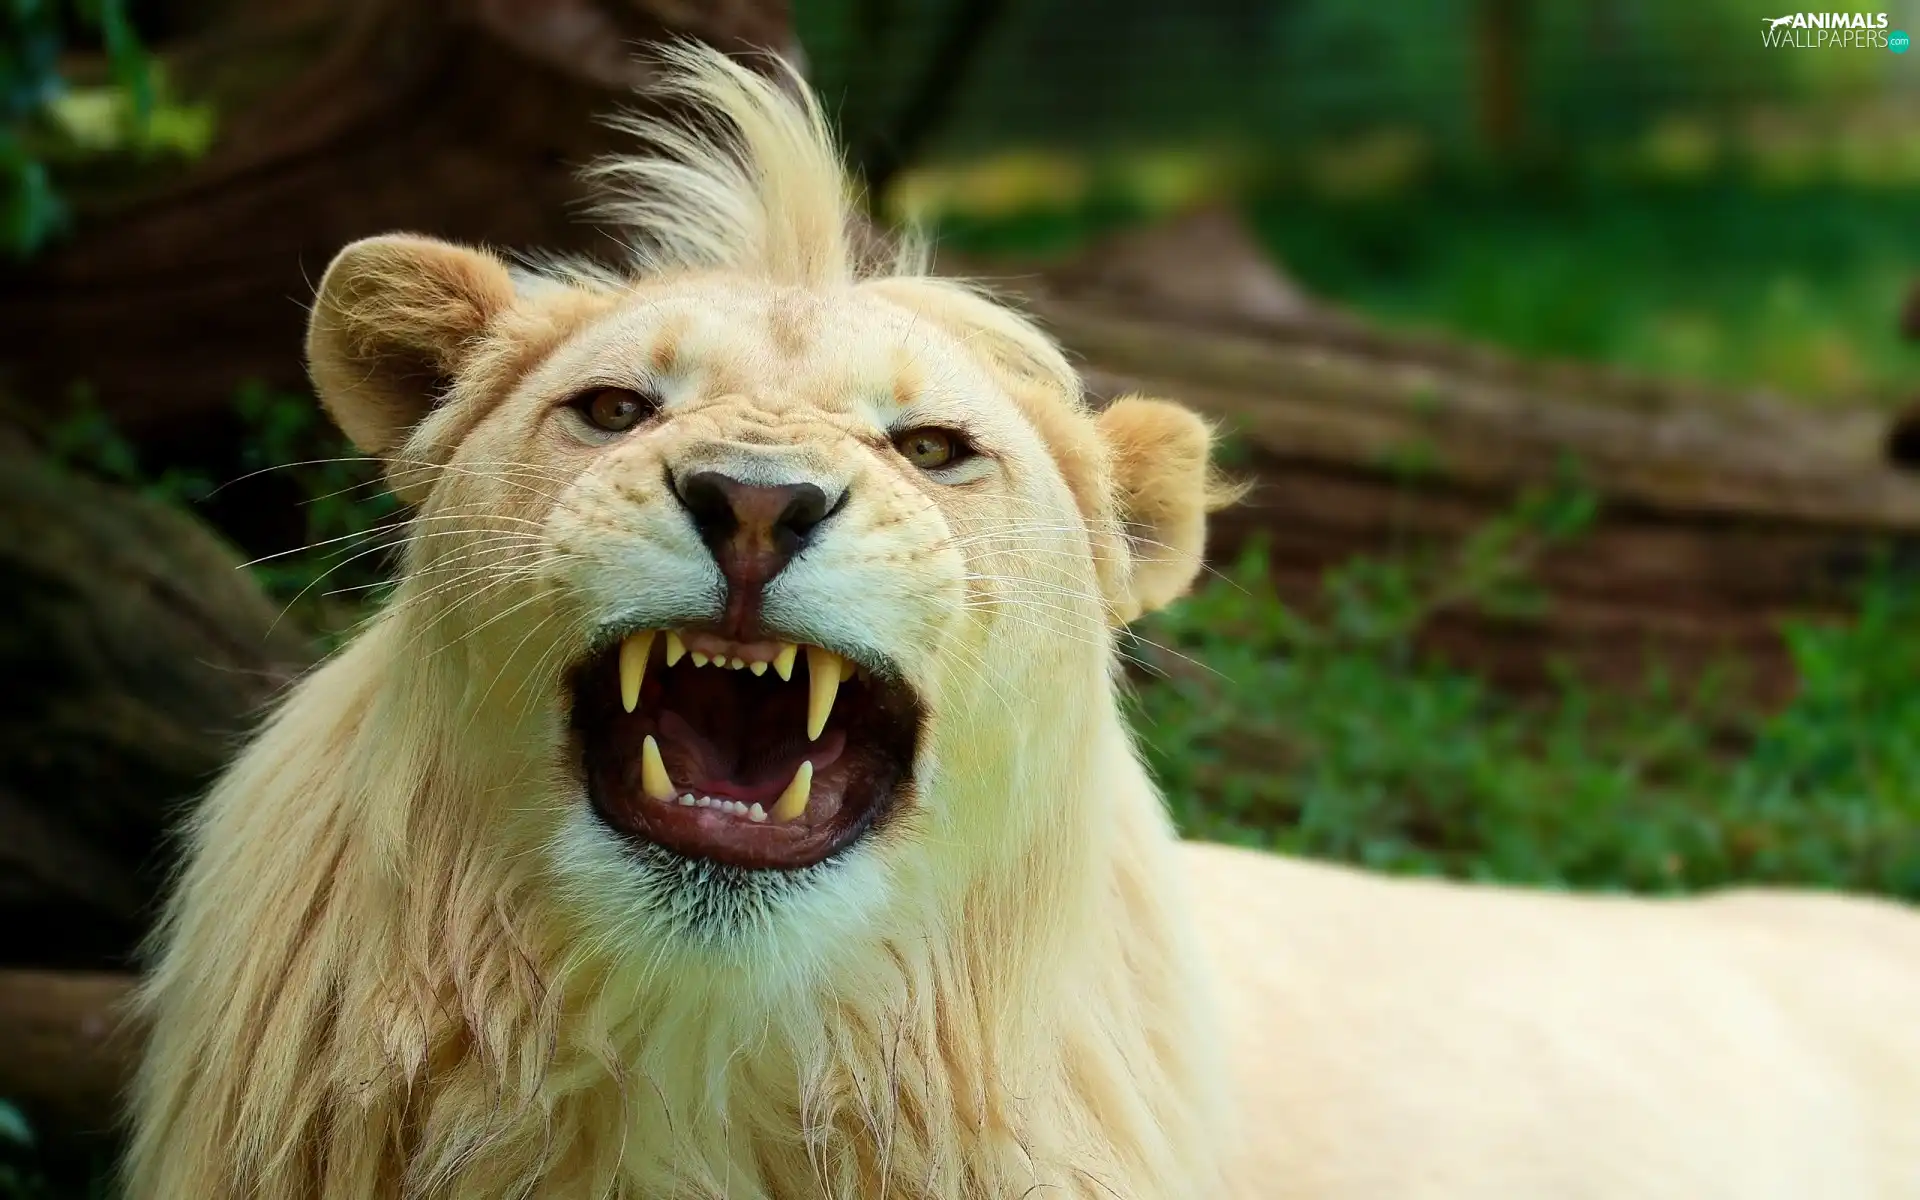 White, bangs, canines, Lion